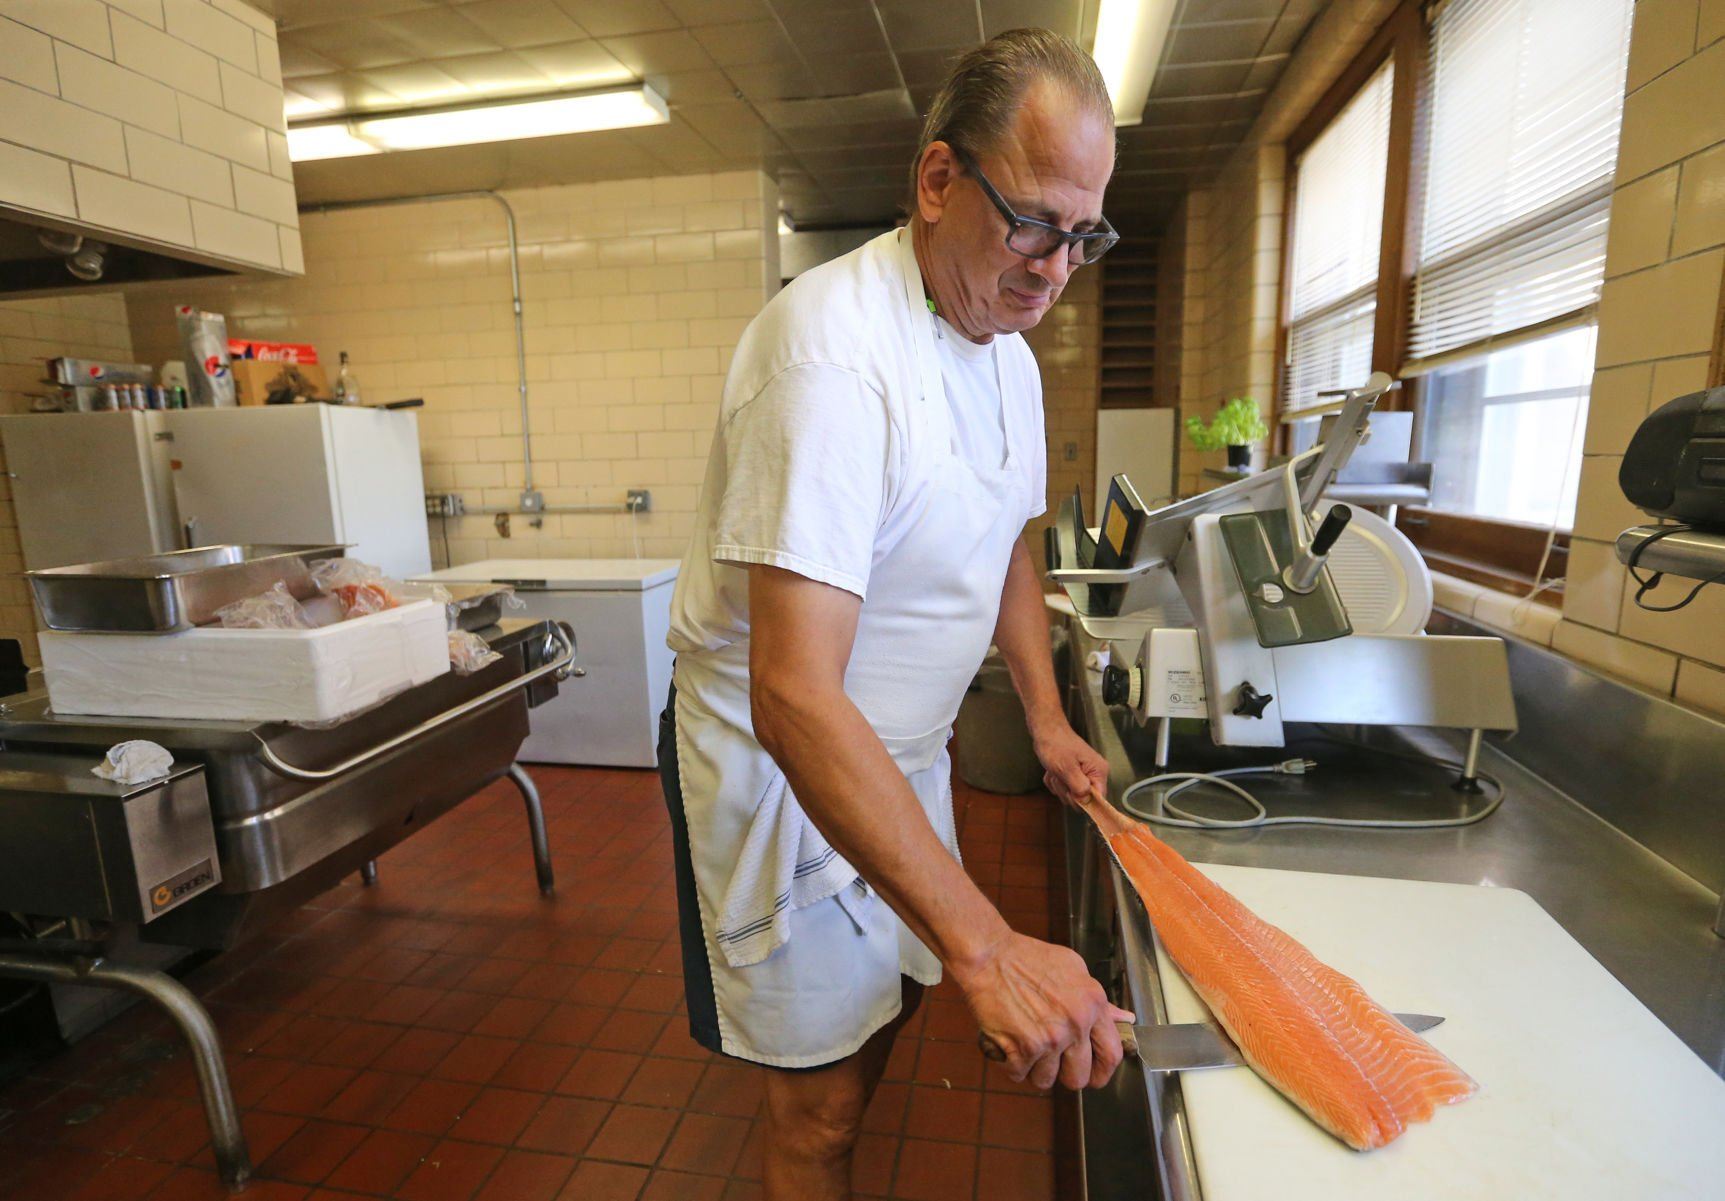 Craig Spielman prepares food at Creative Catering in Dubuque on Thursday.    PHOTO CREDIT: JESSICA REILLY